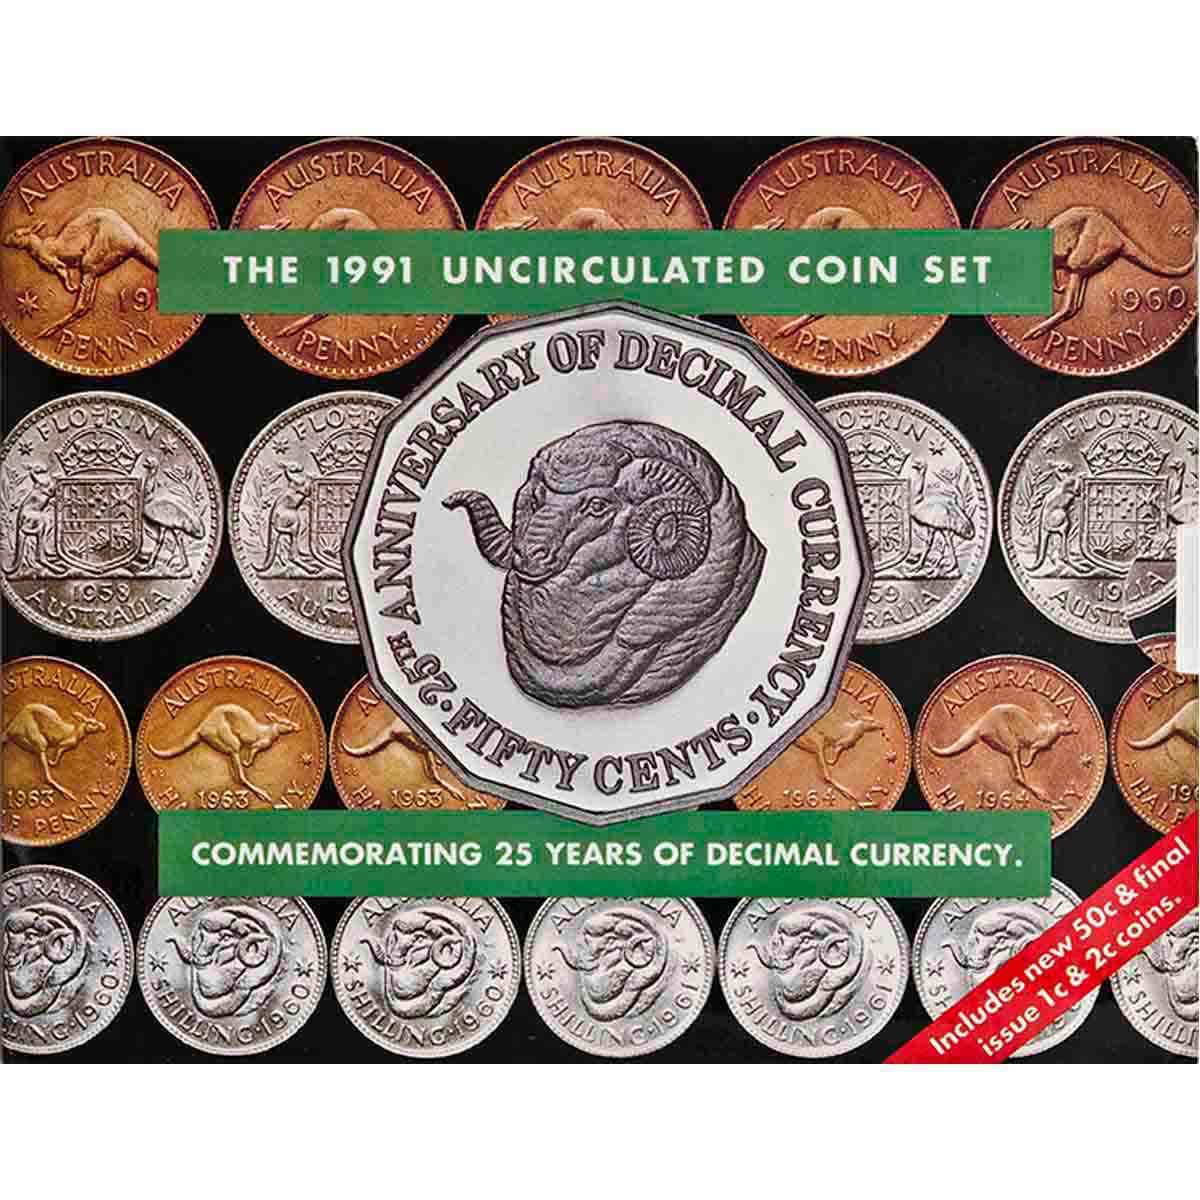 Australia Decimal Currency 25th Anniversary 1991 8-Coin Mint Set